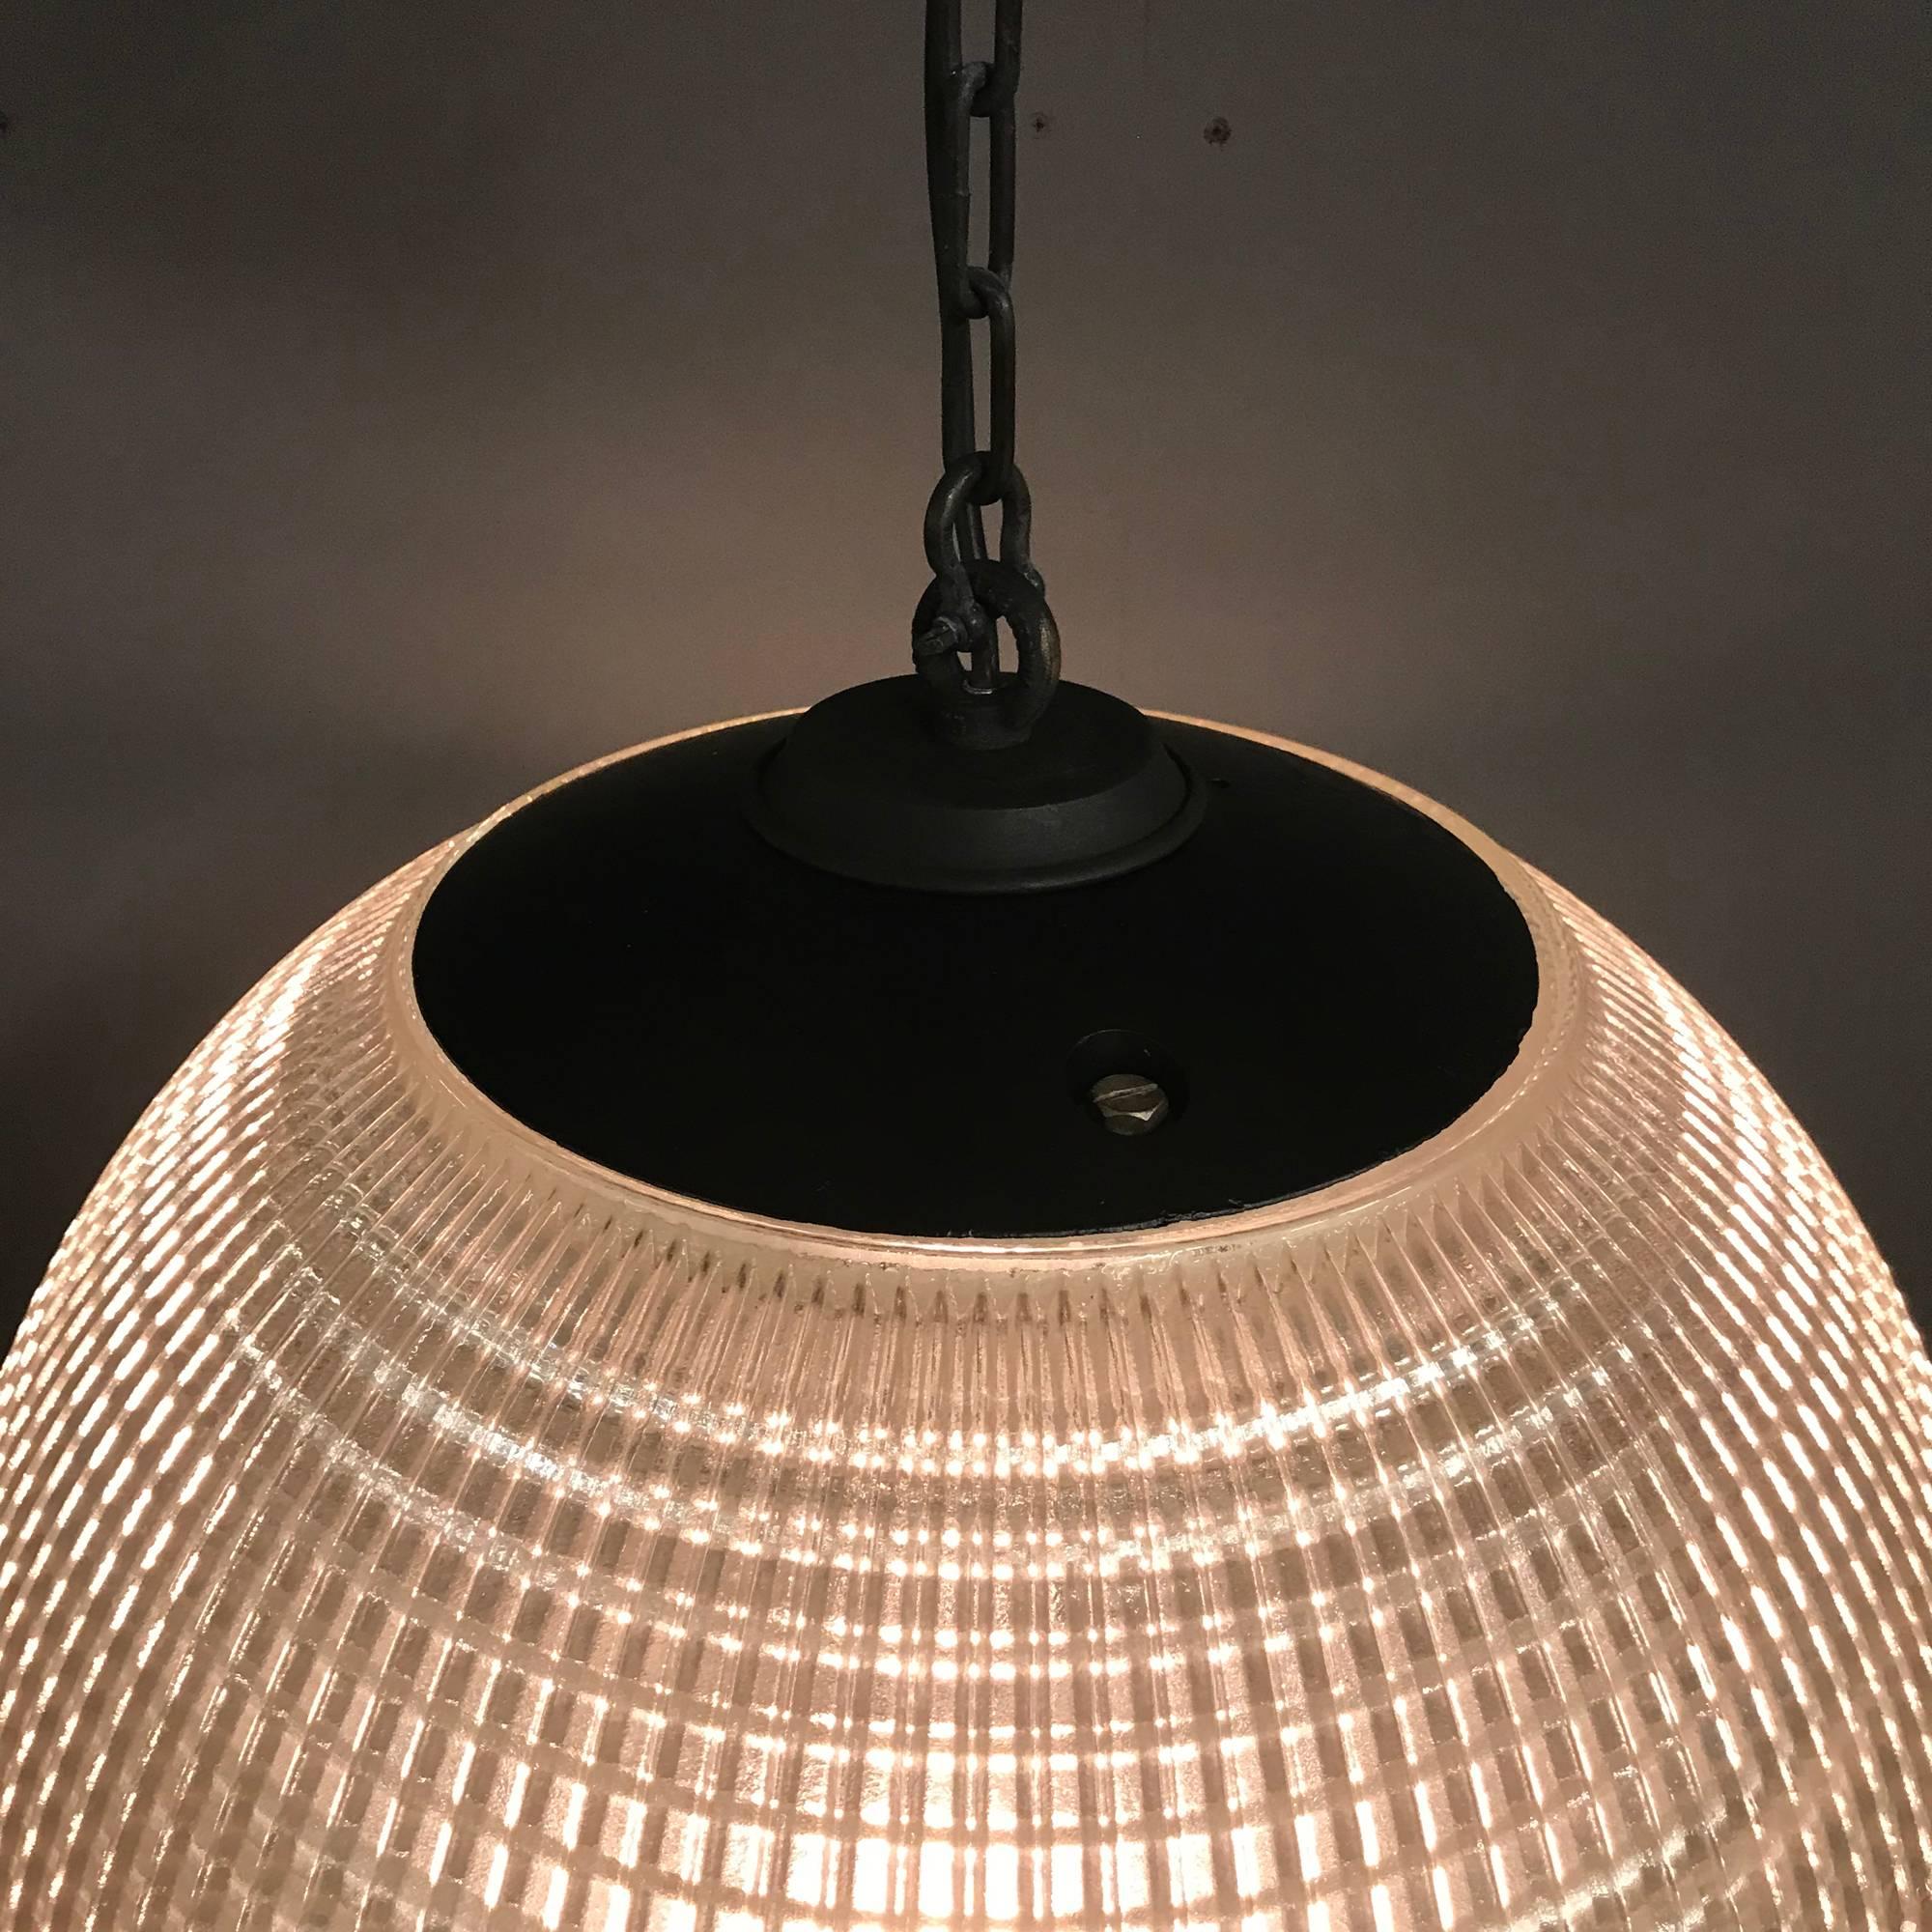 This light is an original Holophane street light from Paris, France. Manufactured during the 1970s. The hallmark of Holophane luminaires, or lighting fixtures, is the borosilicate glass reflector/refractor. The glass prismsribs provide a combination